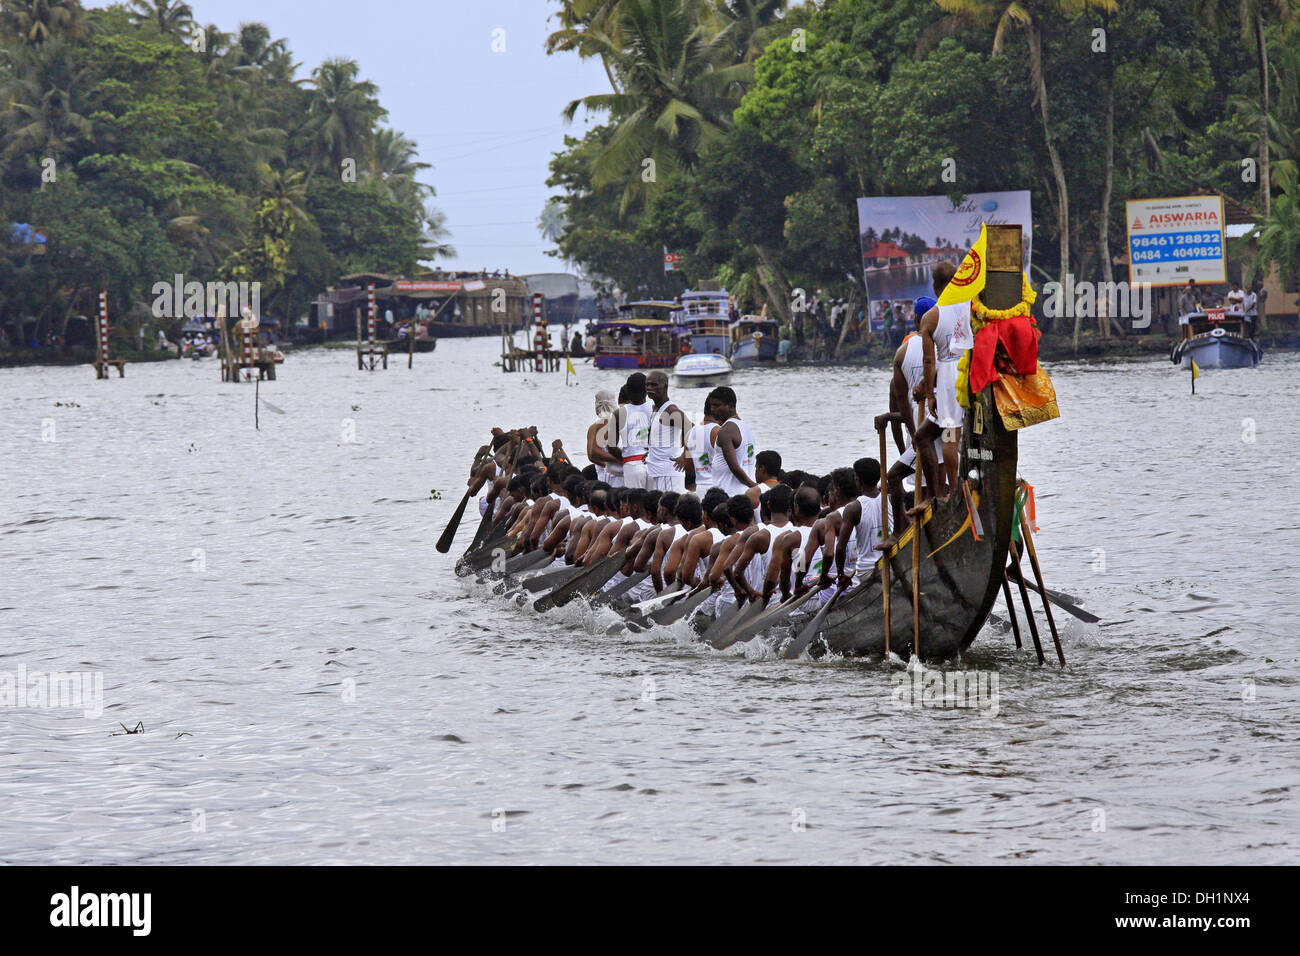 Boat Race Lac Punnamada Kerala Inde Alleppey Banque D'Images